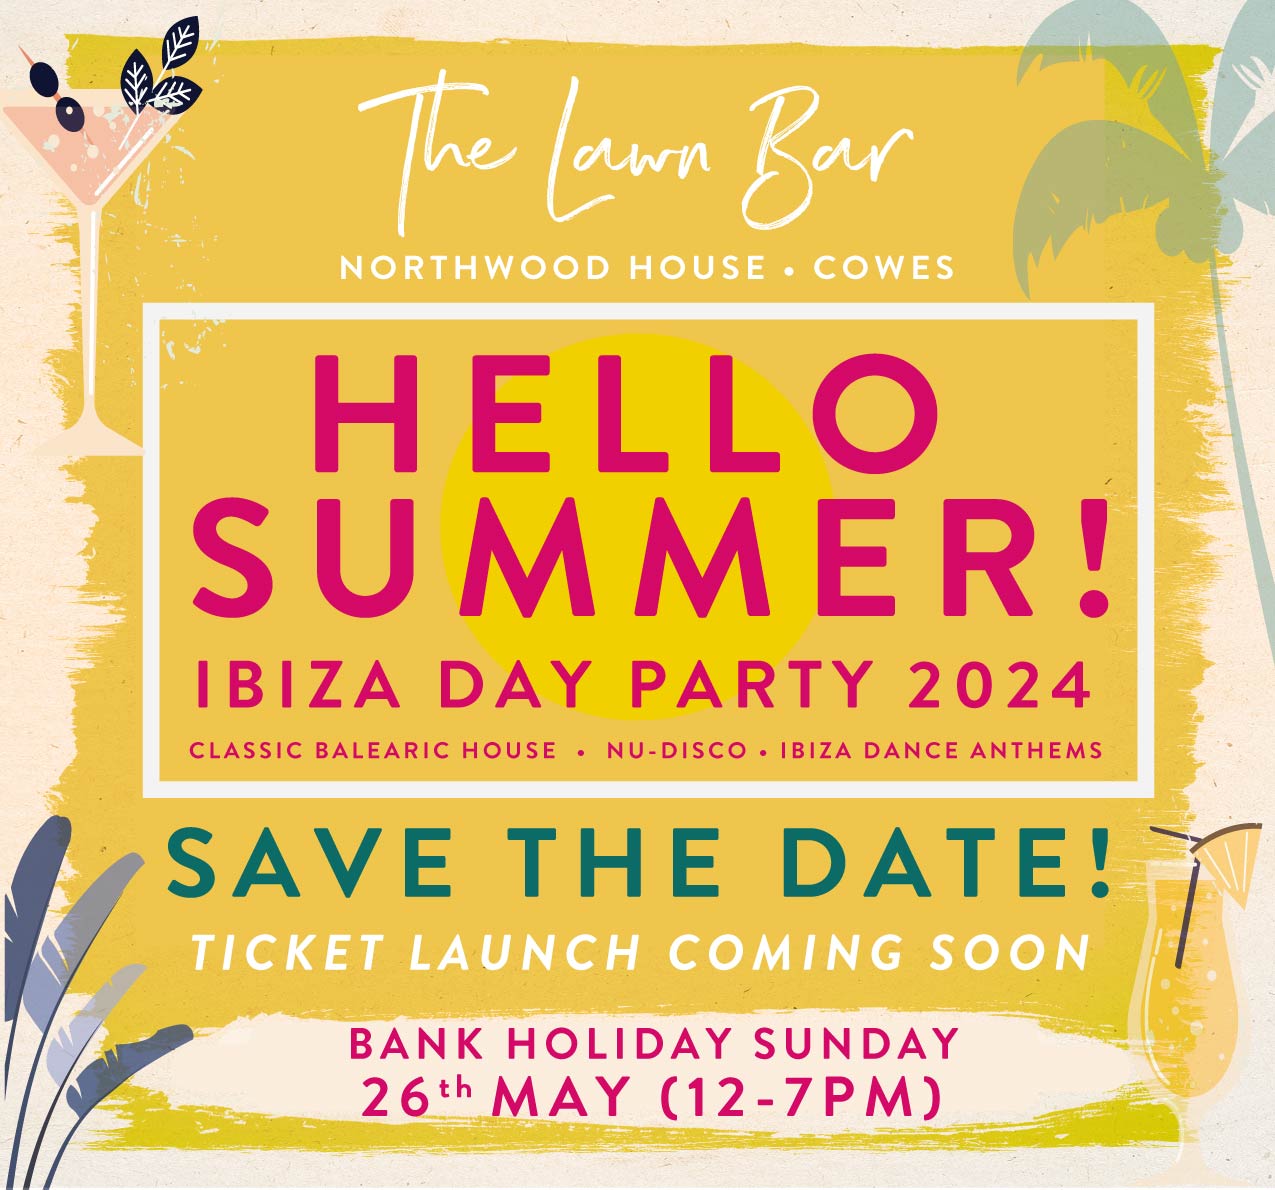 Lawn Bar “Hello Summer!” Ibiza Day Party: SAVE THE DATE